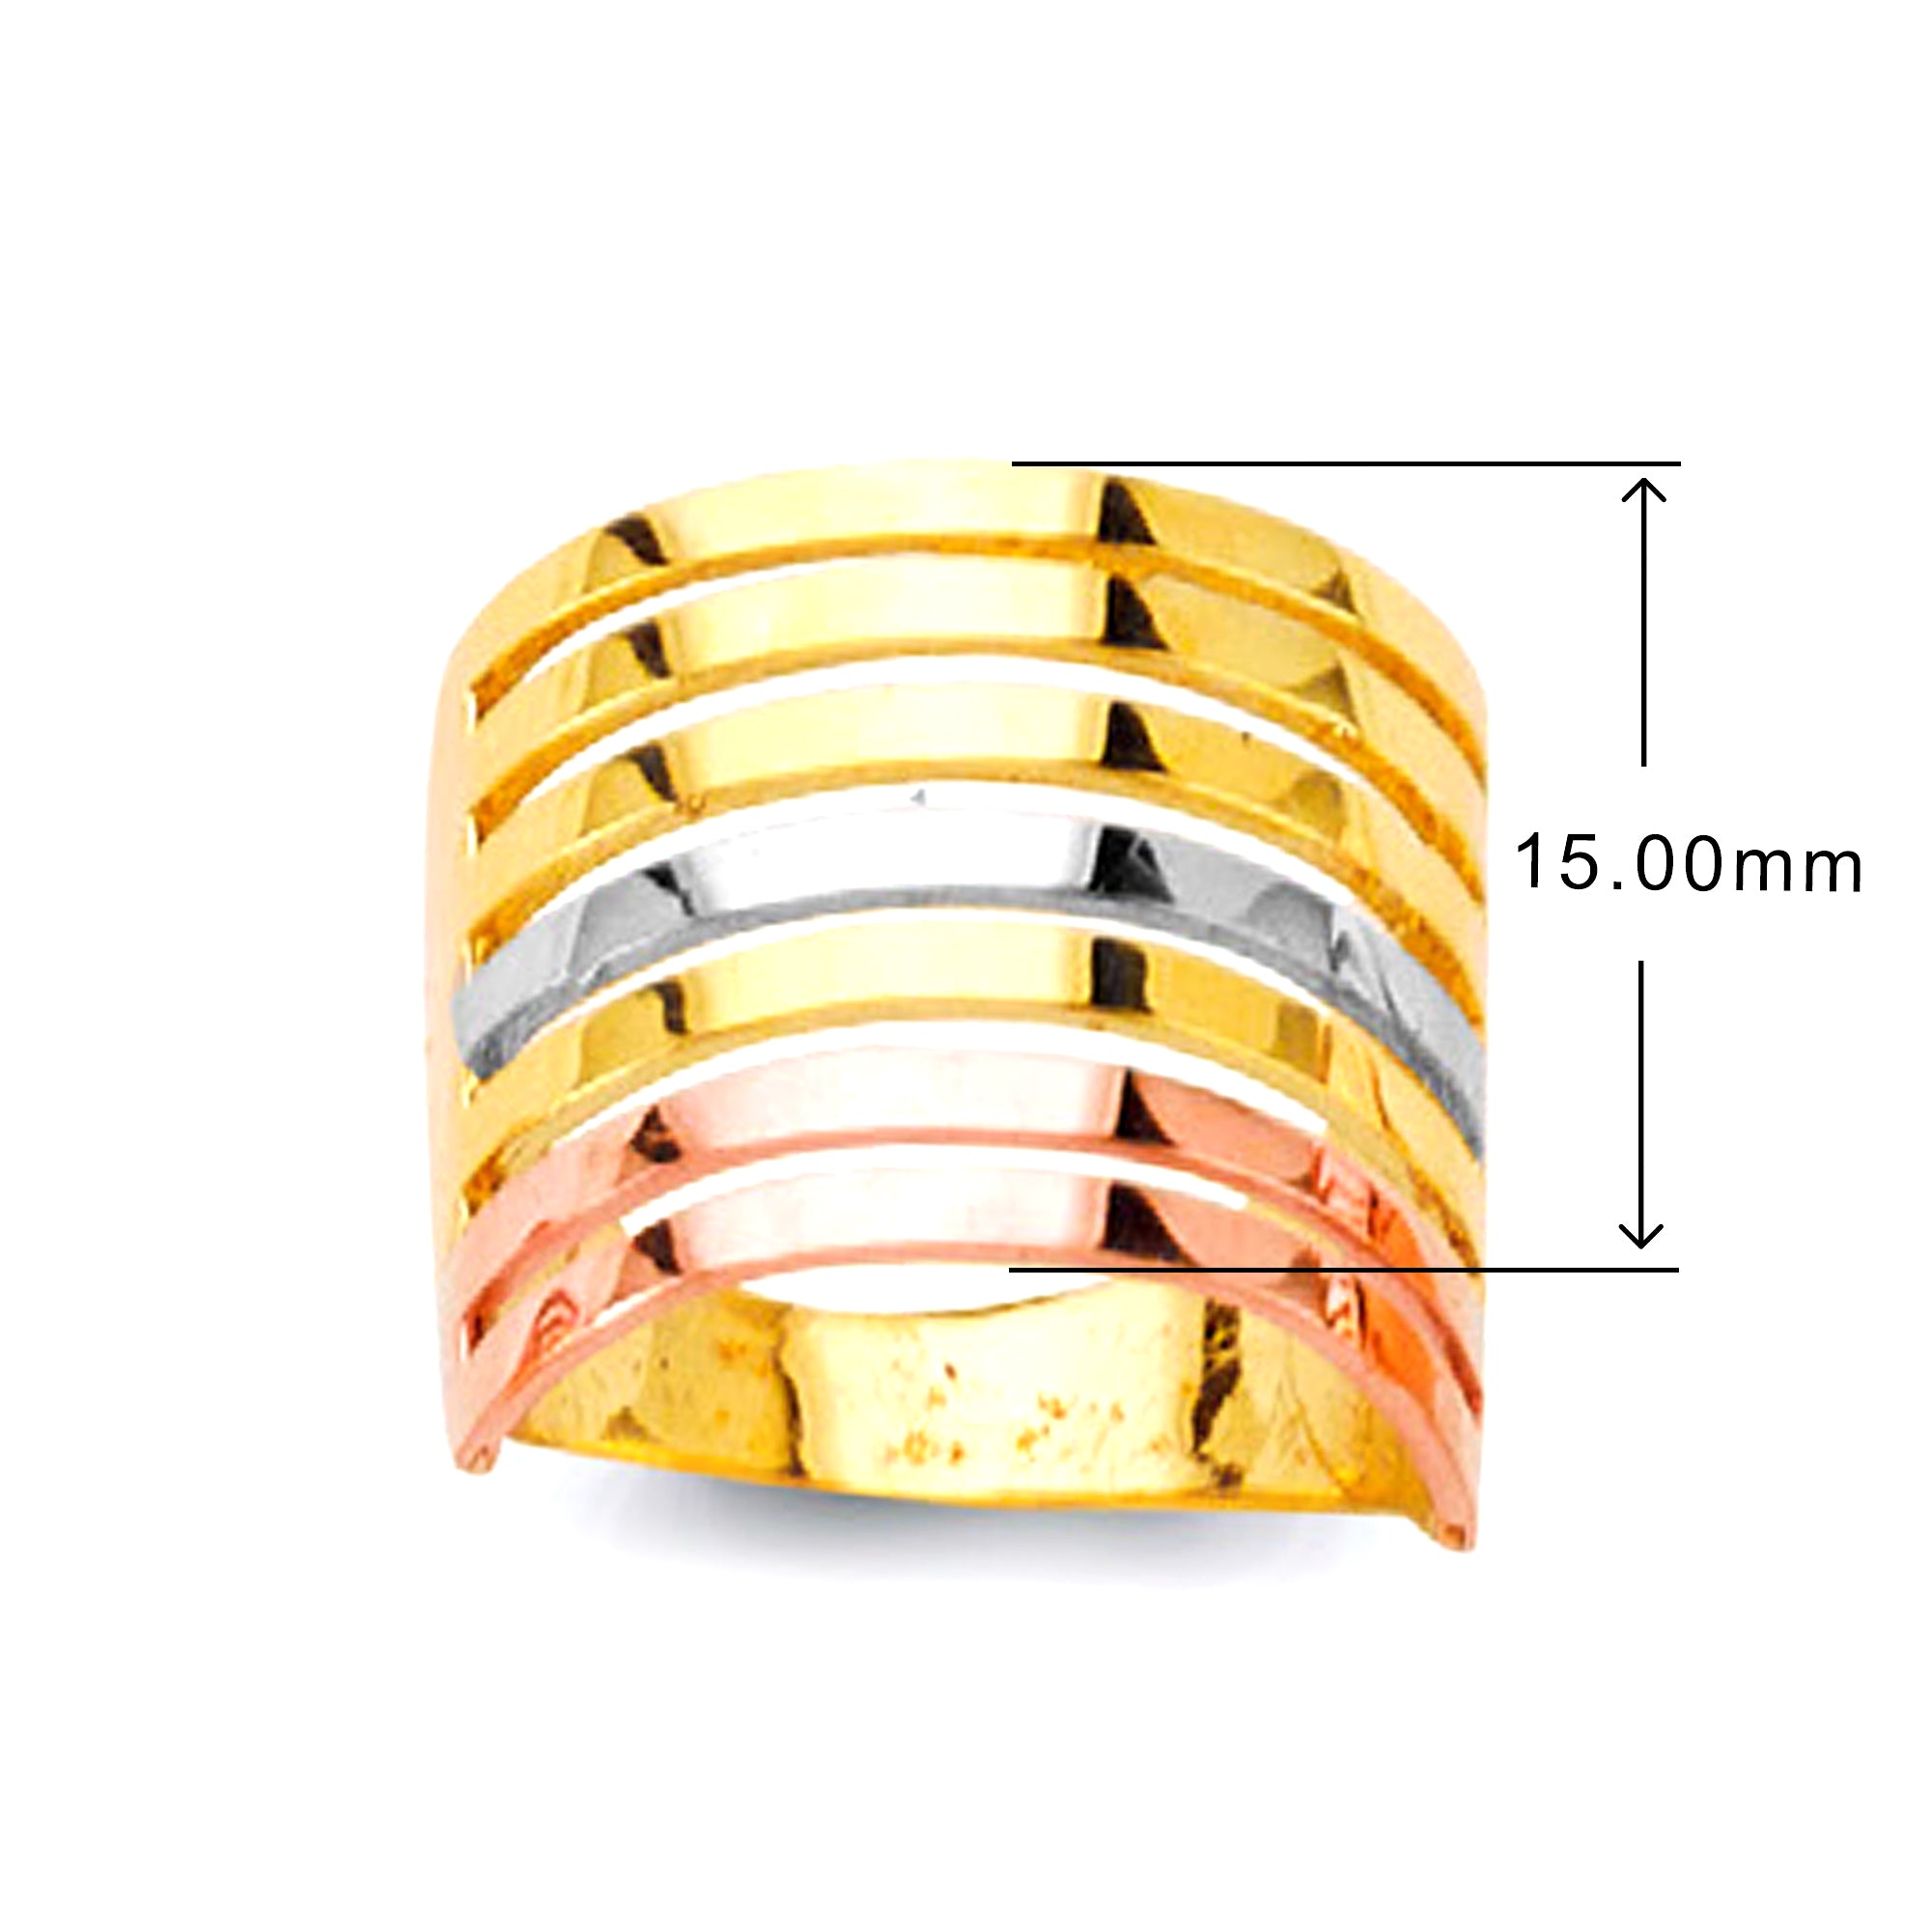 Minimalist Layered Ring in Solid Gold with Measurement